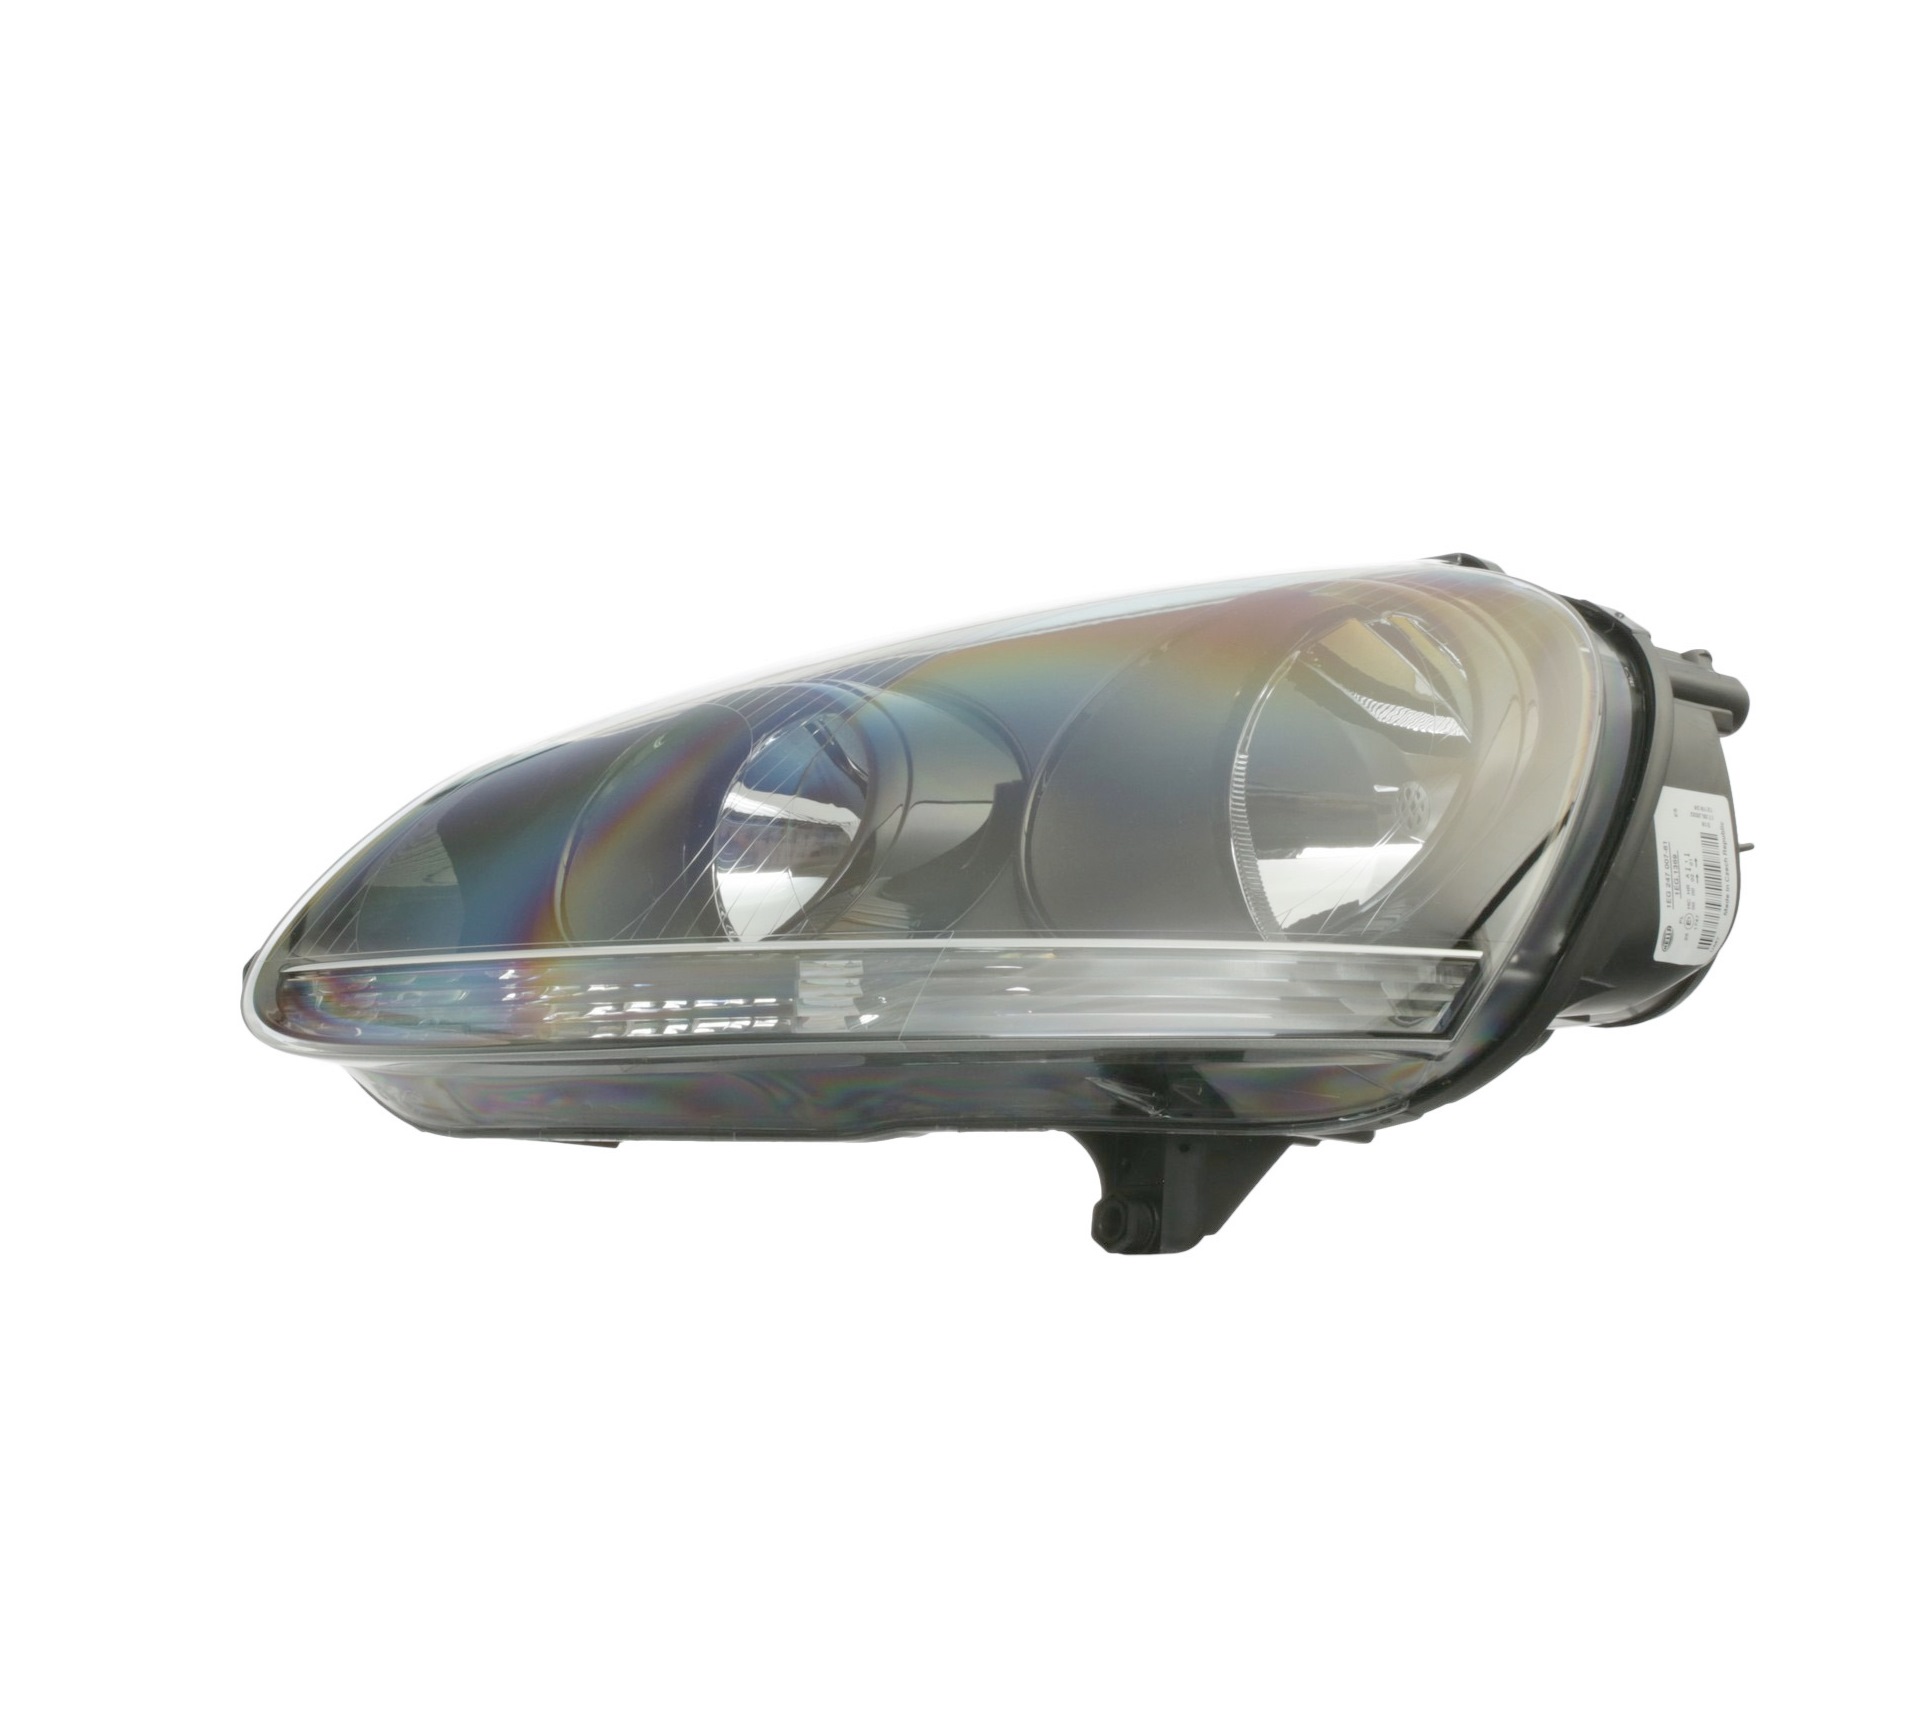 HELLA 1EG 247 007-611 Headlight Left, W5W, PY21W, H7/H7, Halogen, FF, 12V, white, with low beam, with indicator, with high beam, with position light, for right-hand traffic, without bulb holder, without bulbs, with motor for headlamp levelling